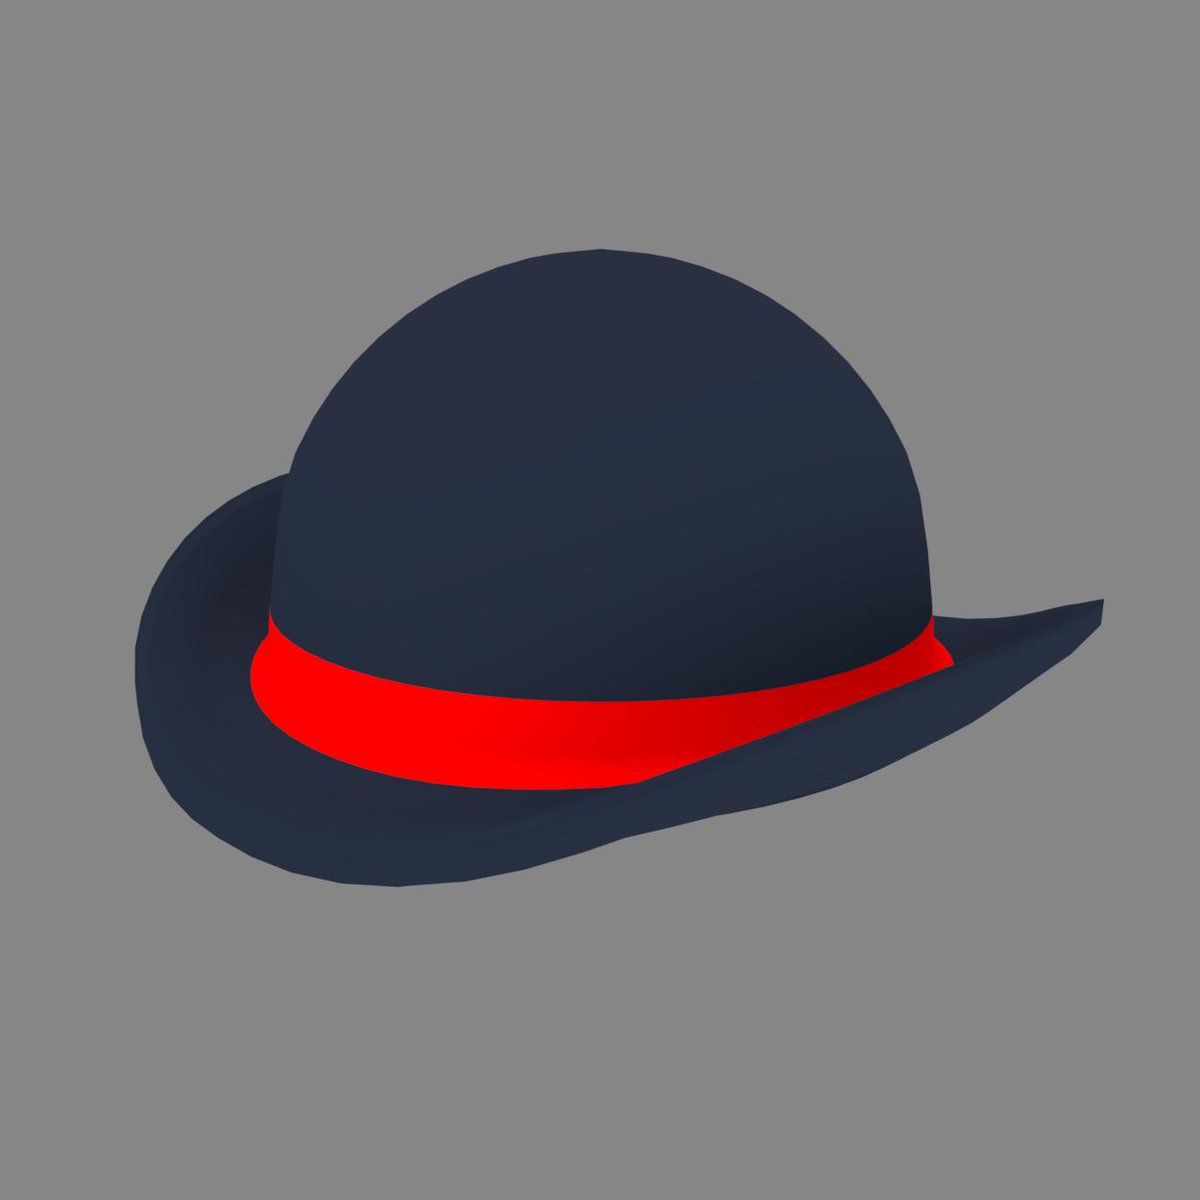 Mas On Twitter My Idea For A Hat Series In Roblox The Colored Banded Bowler Hat Series Will Include Blue Banded Bowler Red Banded Bowler Yellow Banded Bowler And White Banded Bowler